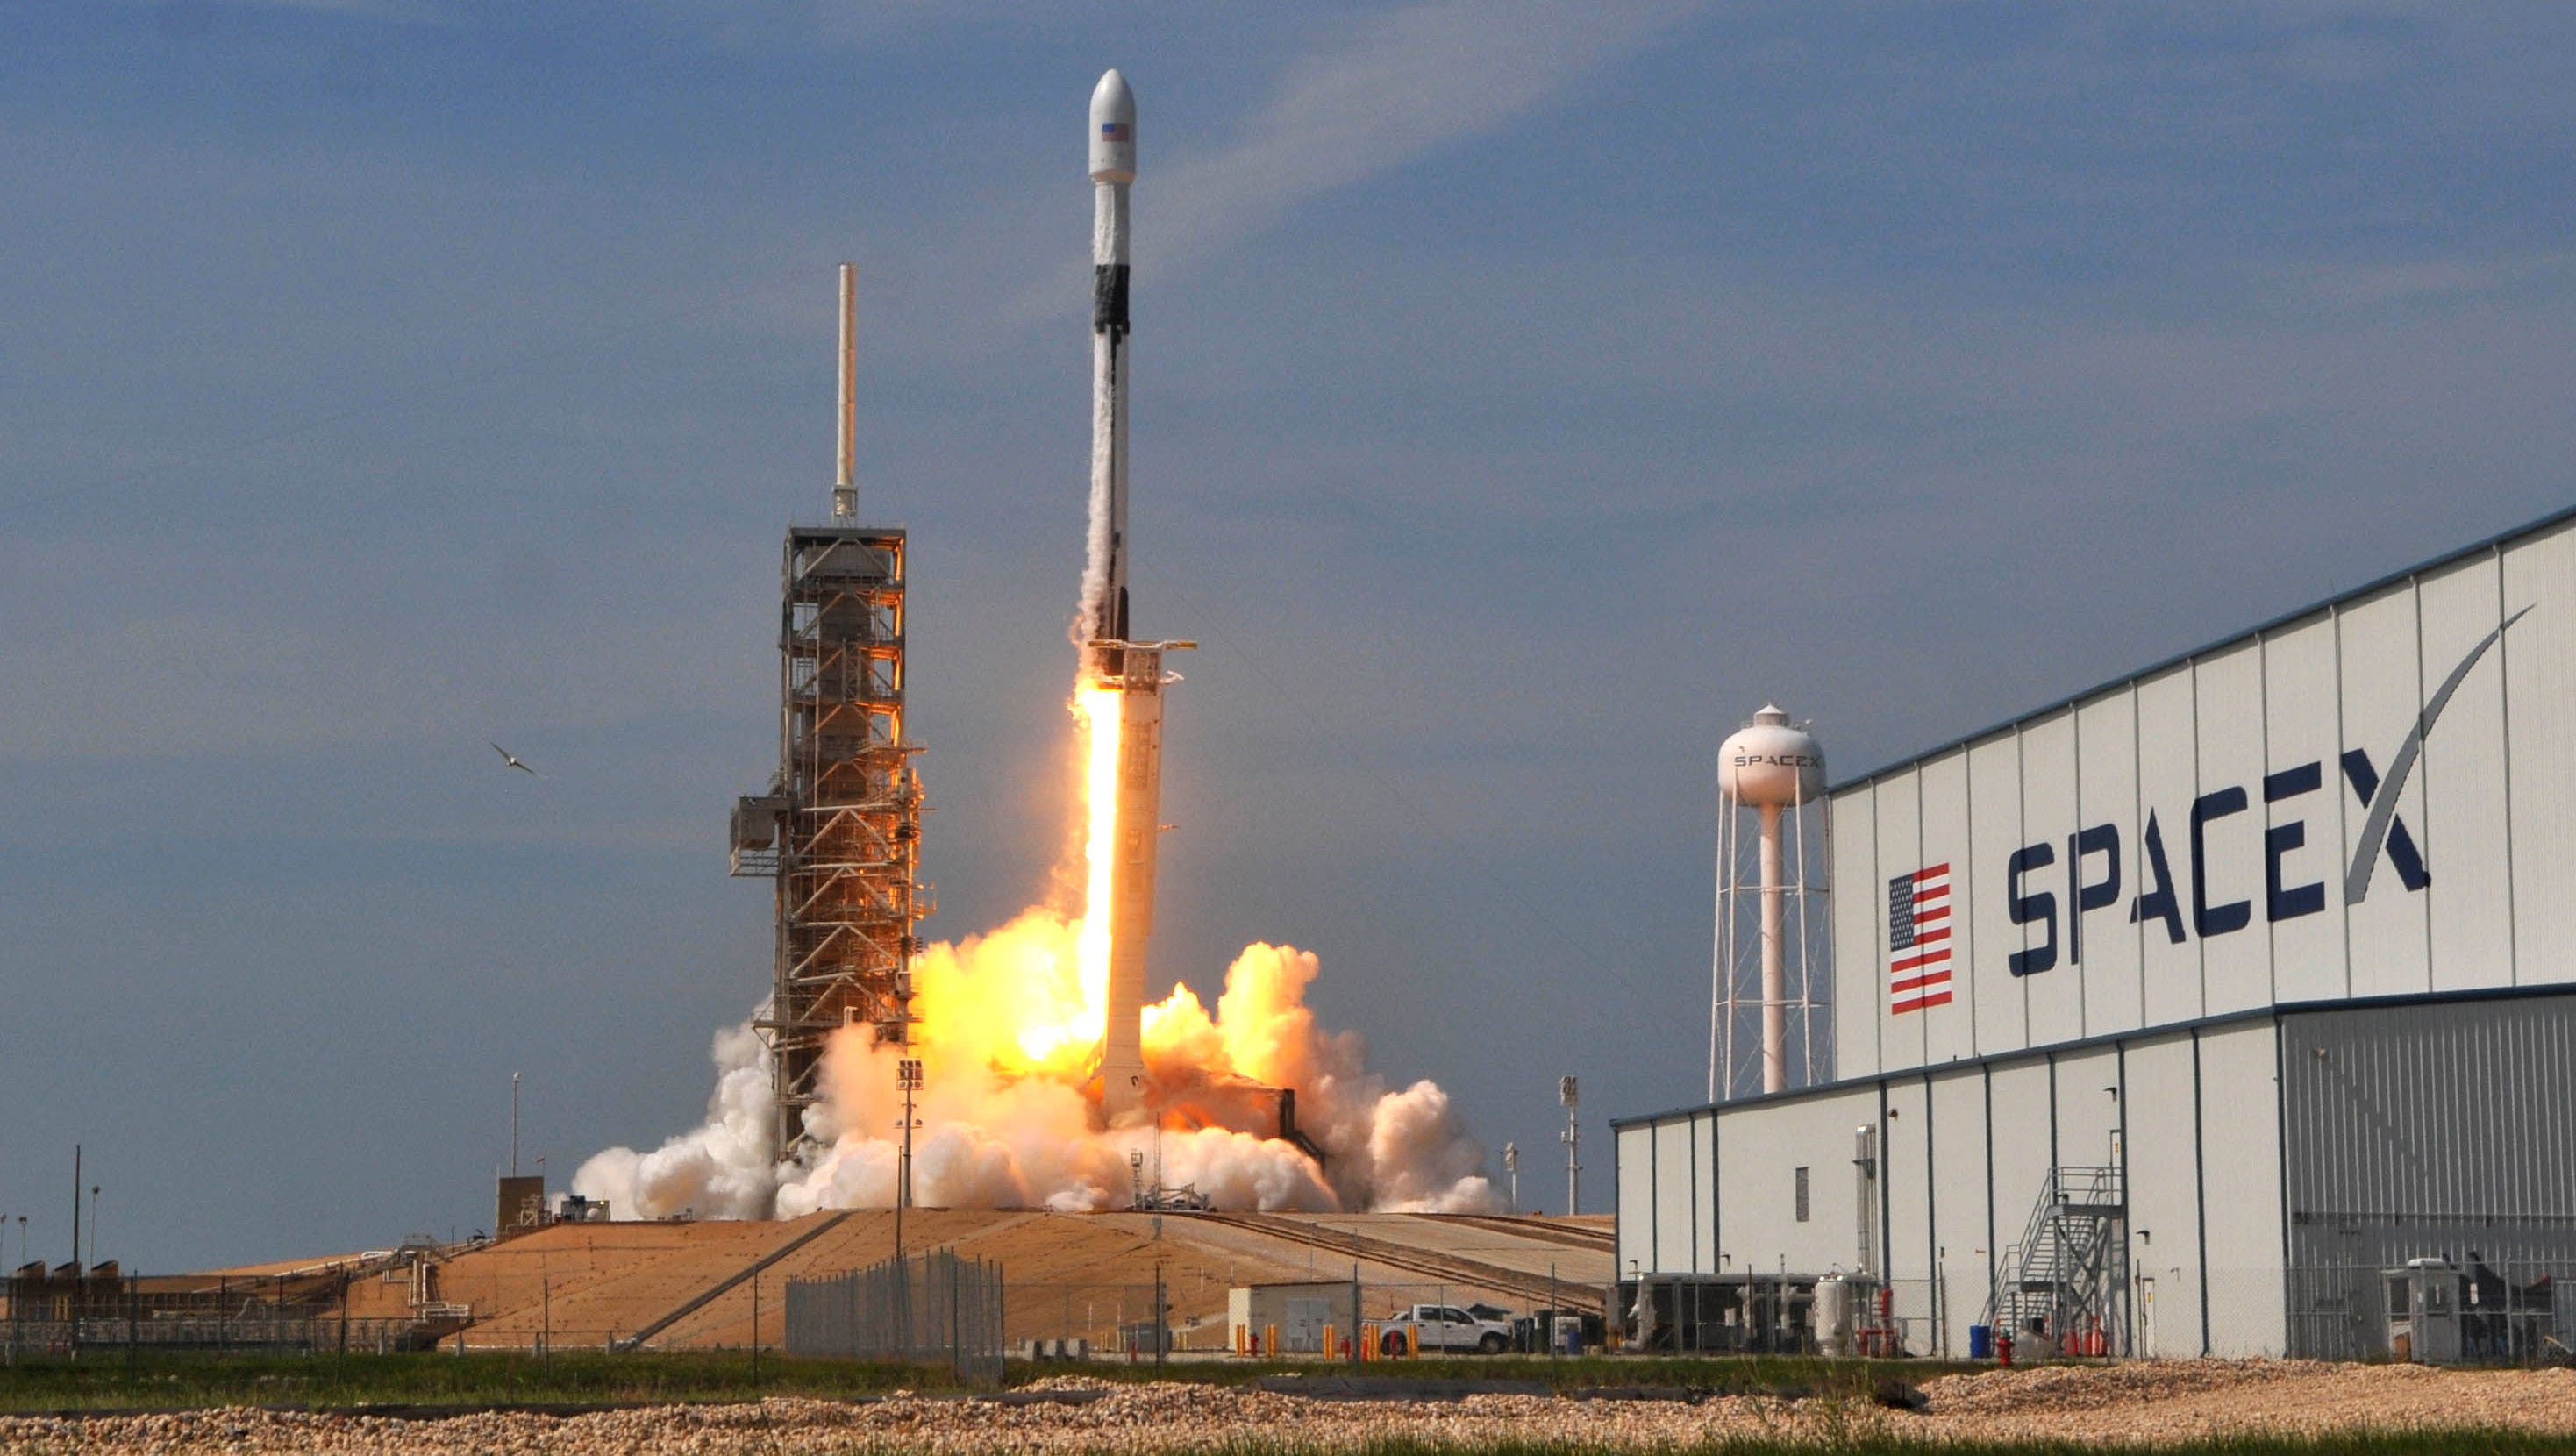 How to watch today's SpaceX launch from Kennedy Space Center